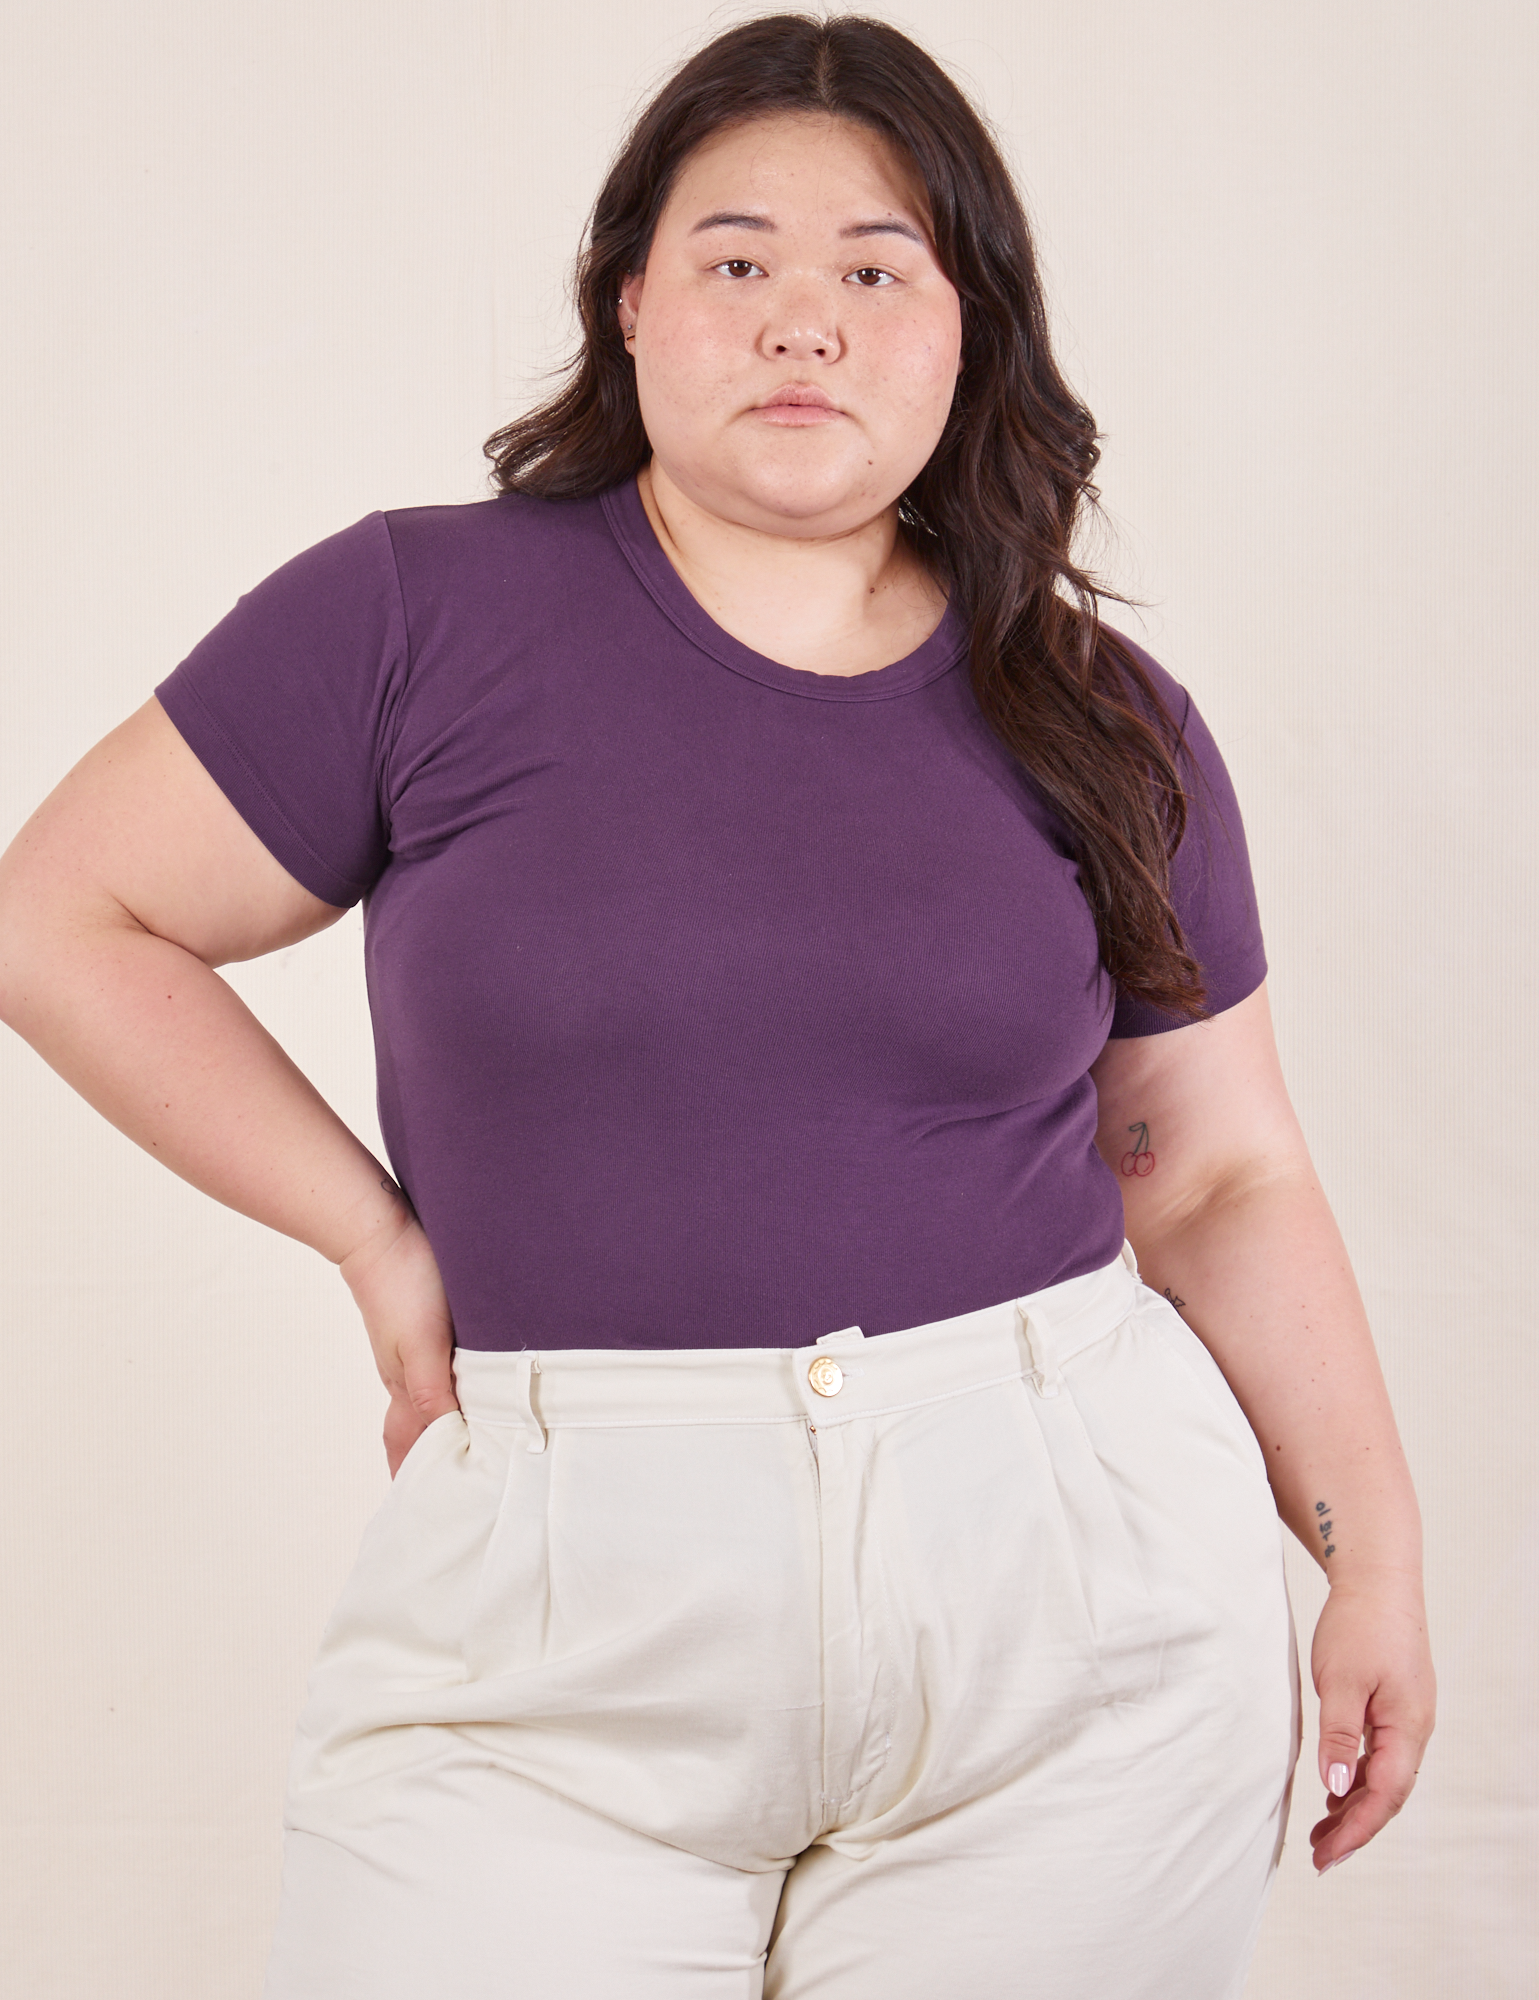 Ashley is wearing Baby Tee in Nebula Purple tucked into vintage off-white Trousers